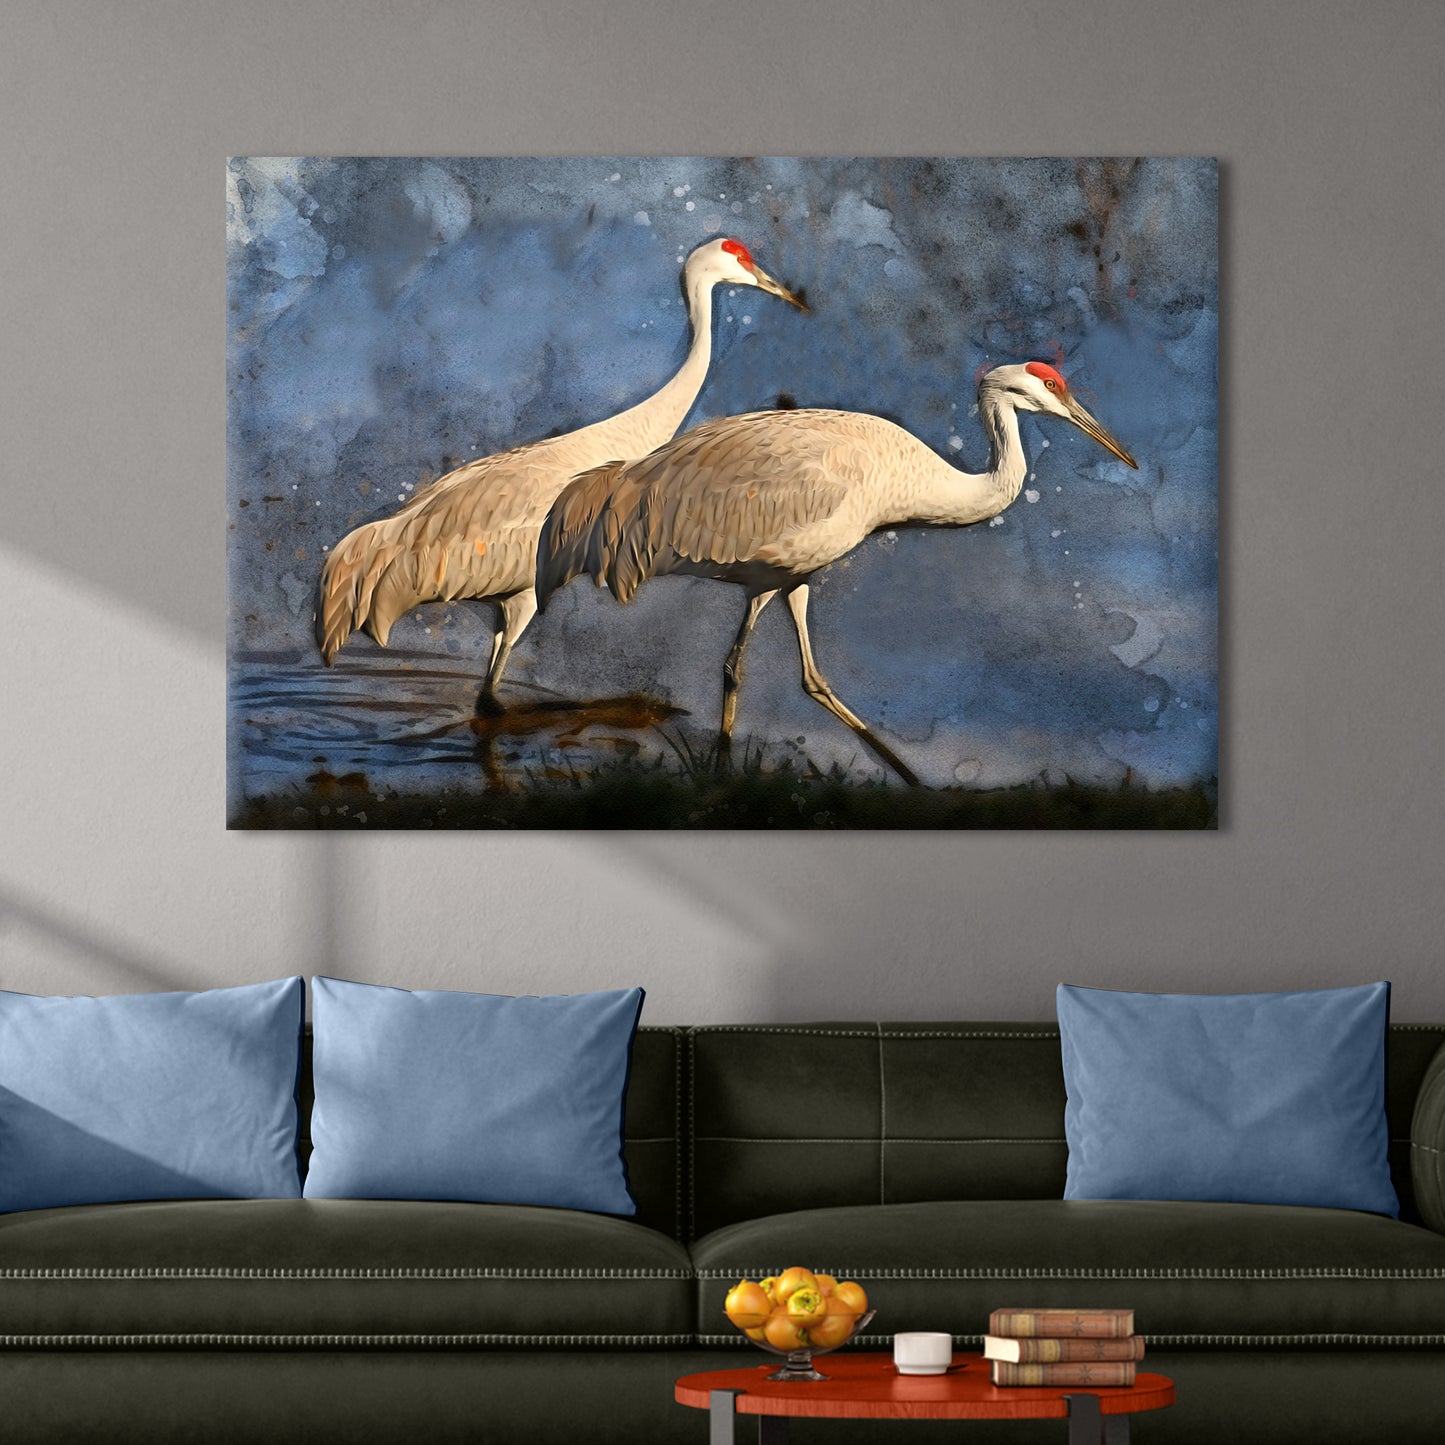 Chinese Crane Wall Art II - Image by Tailored Canvases